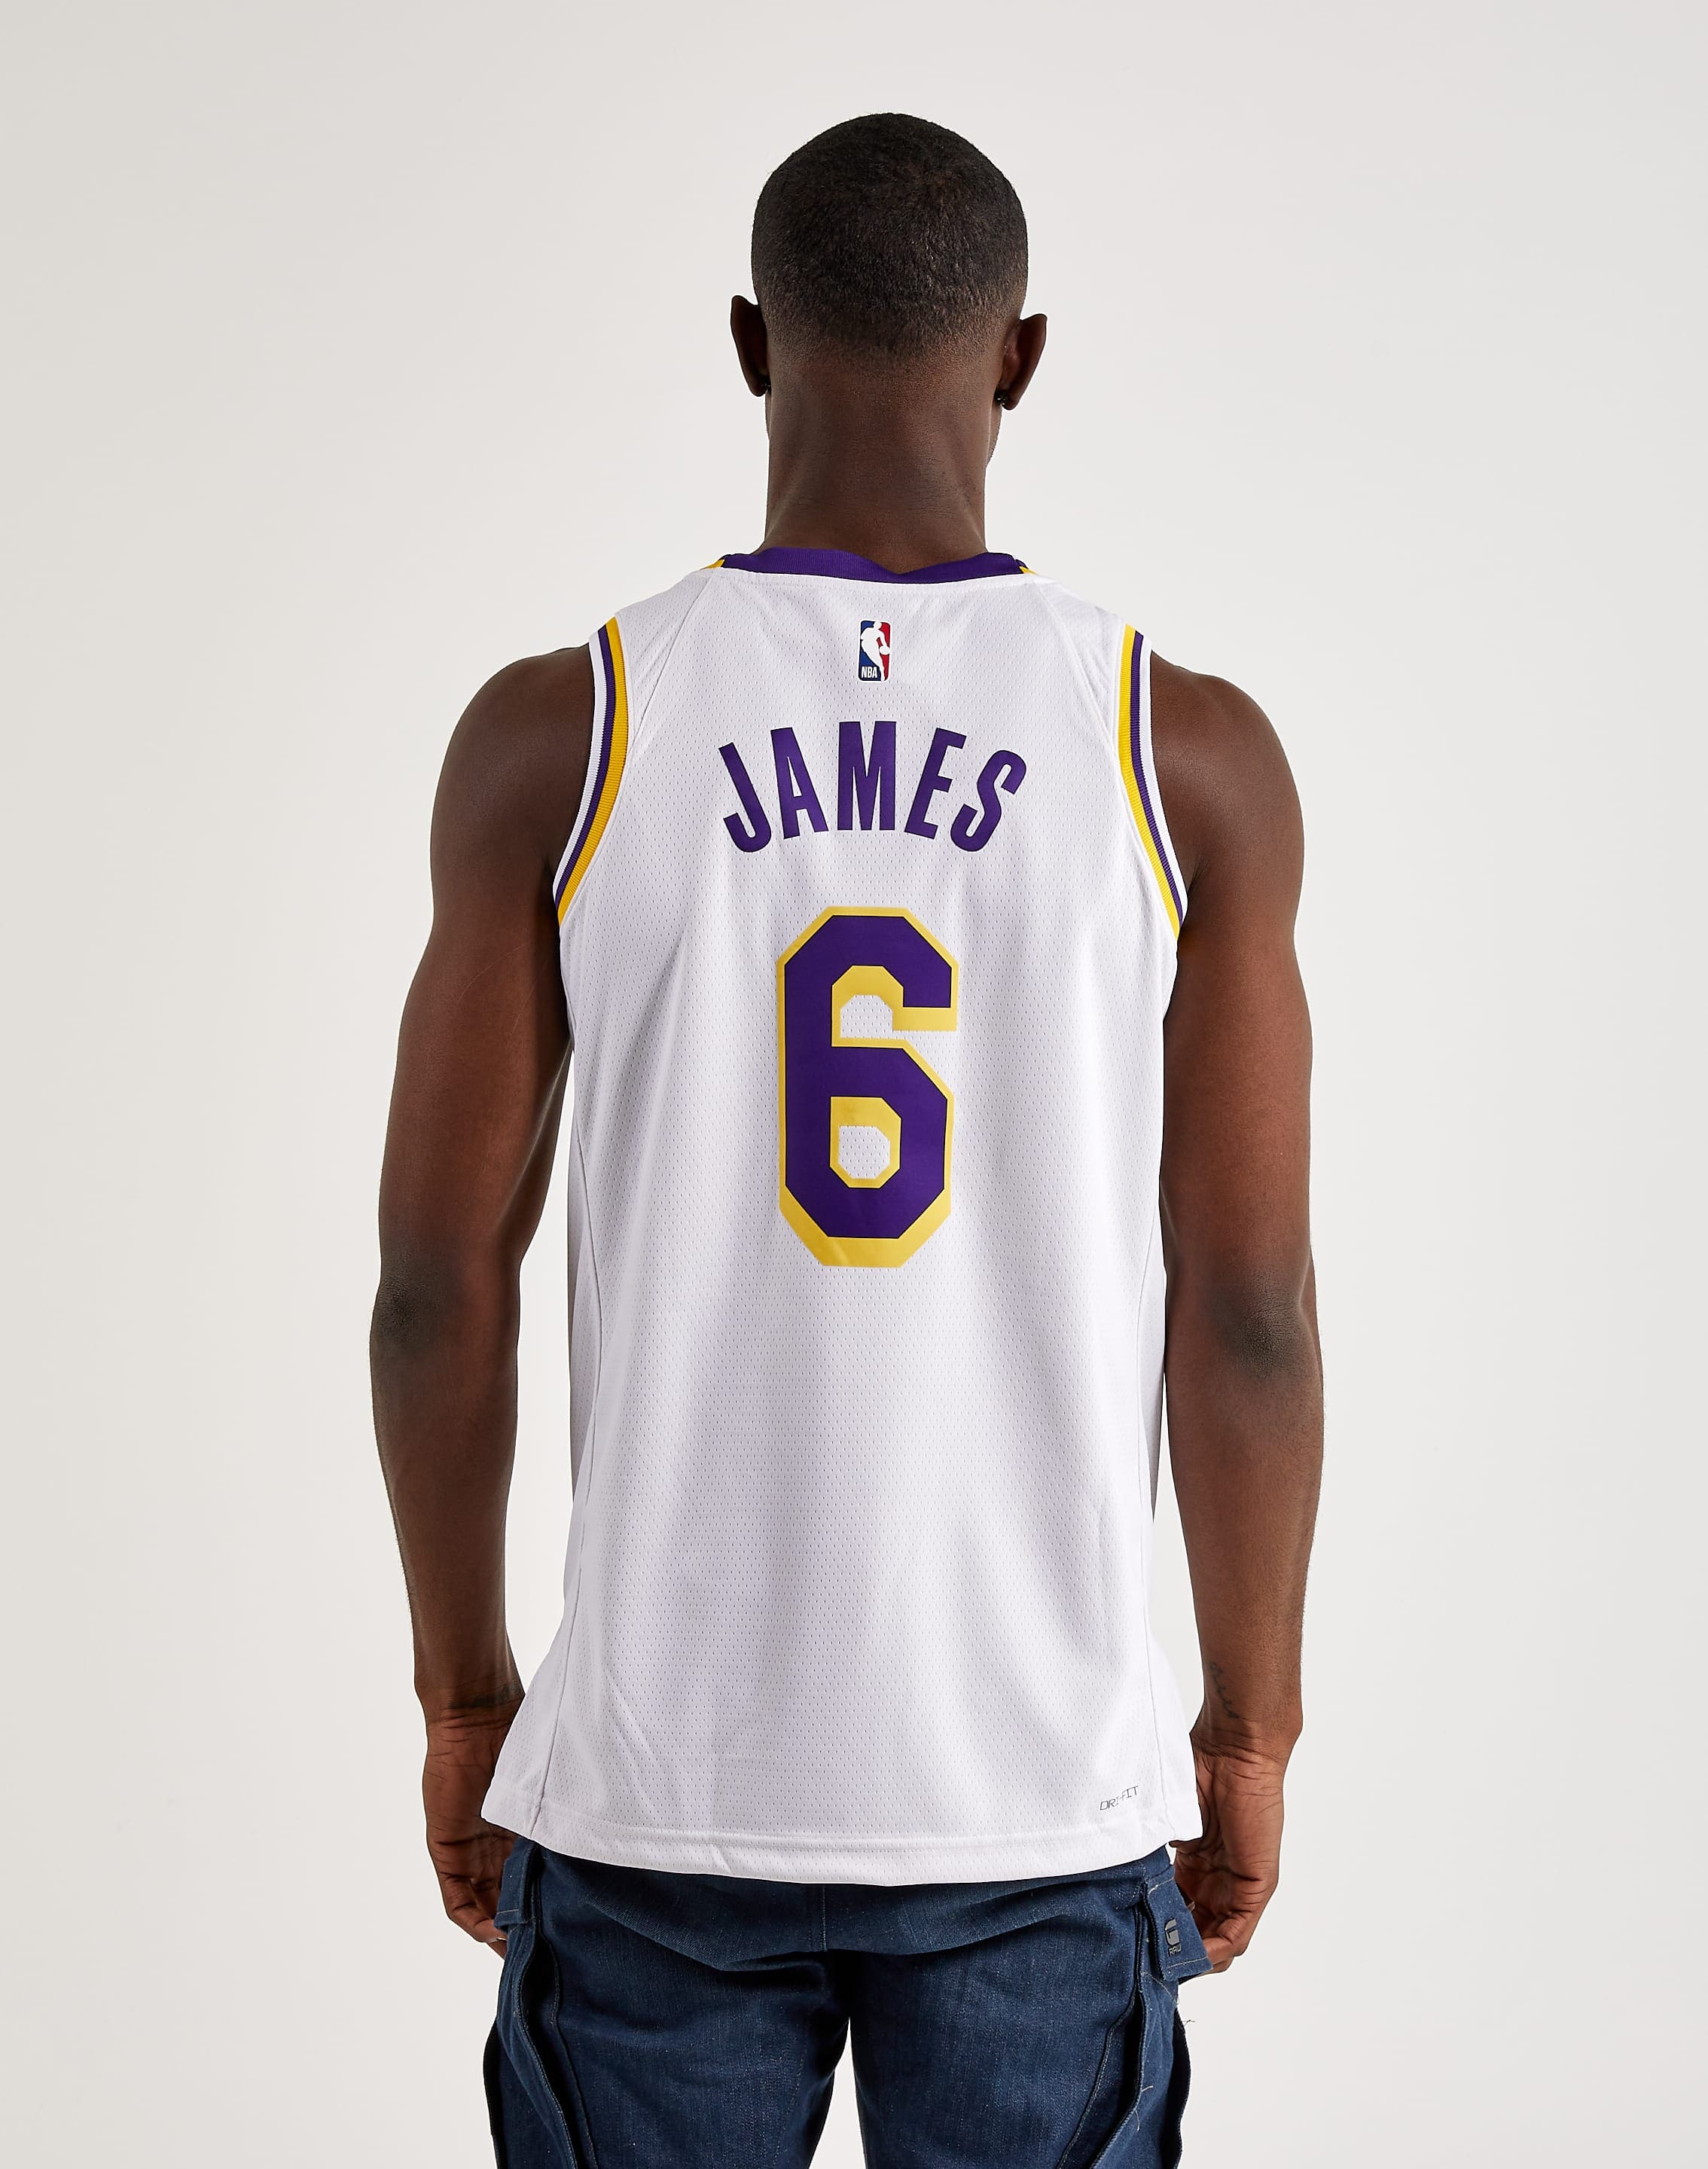 Order the new Lakers jerseys LeBron & Co. wore at media day 